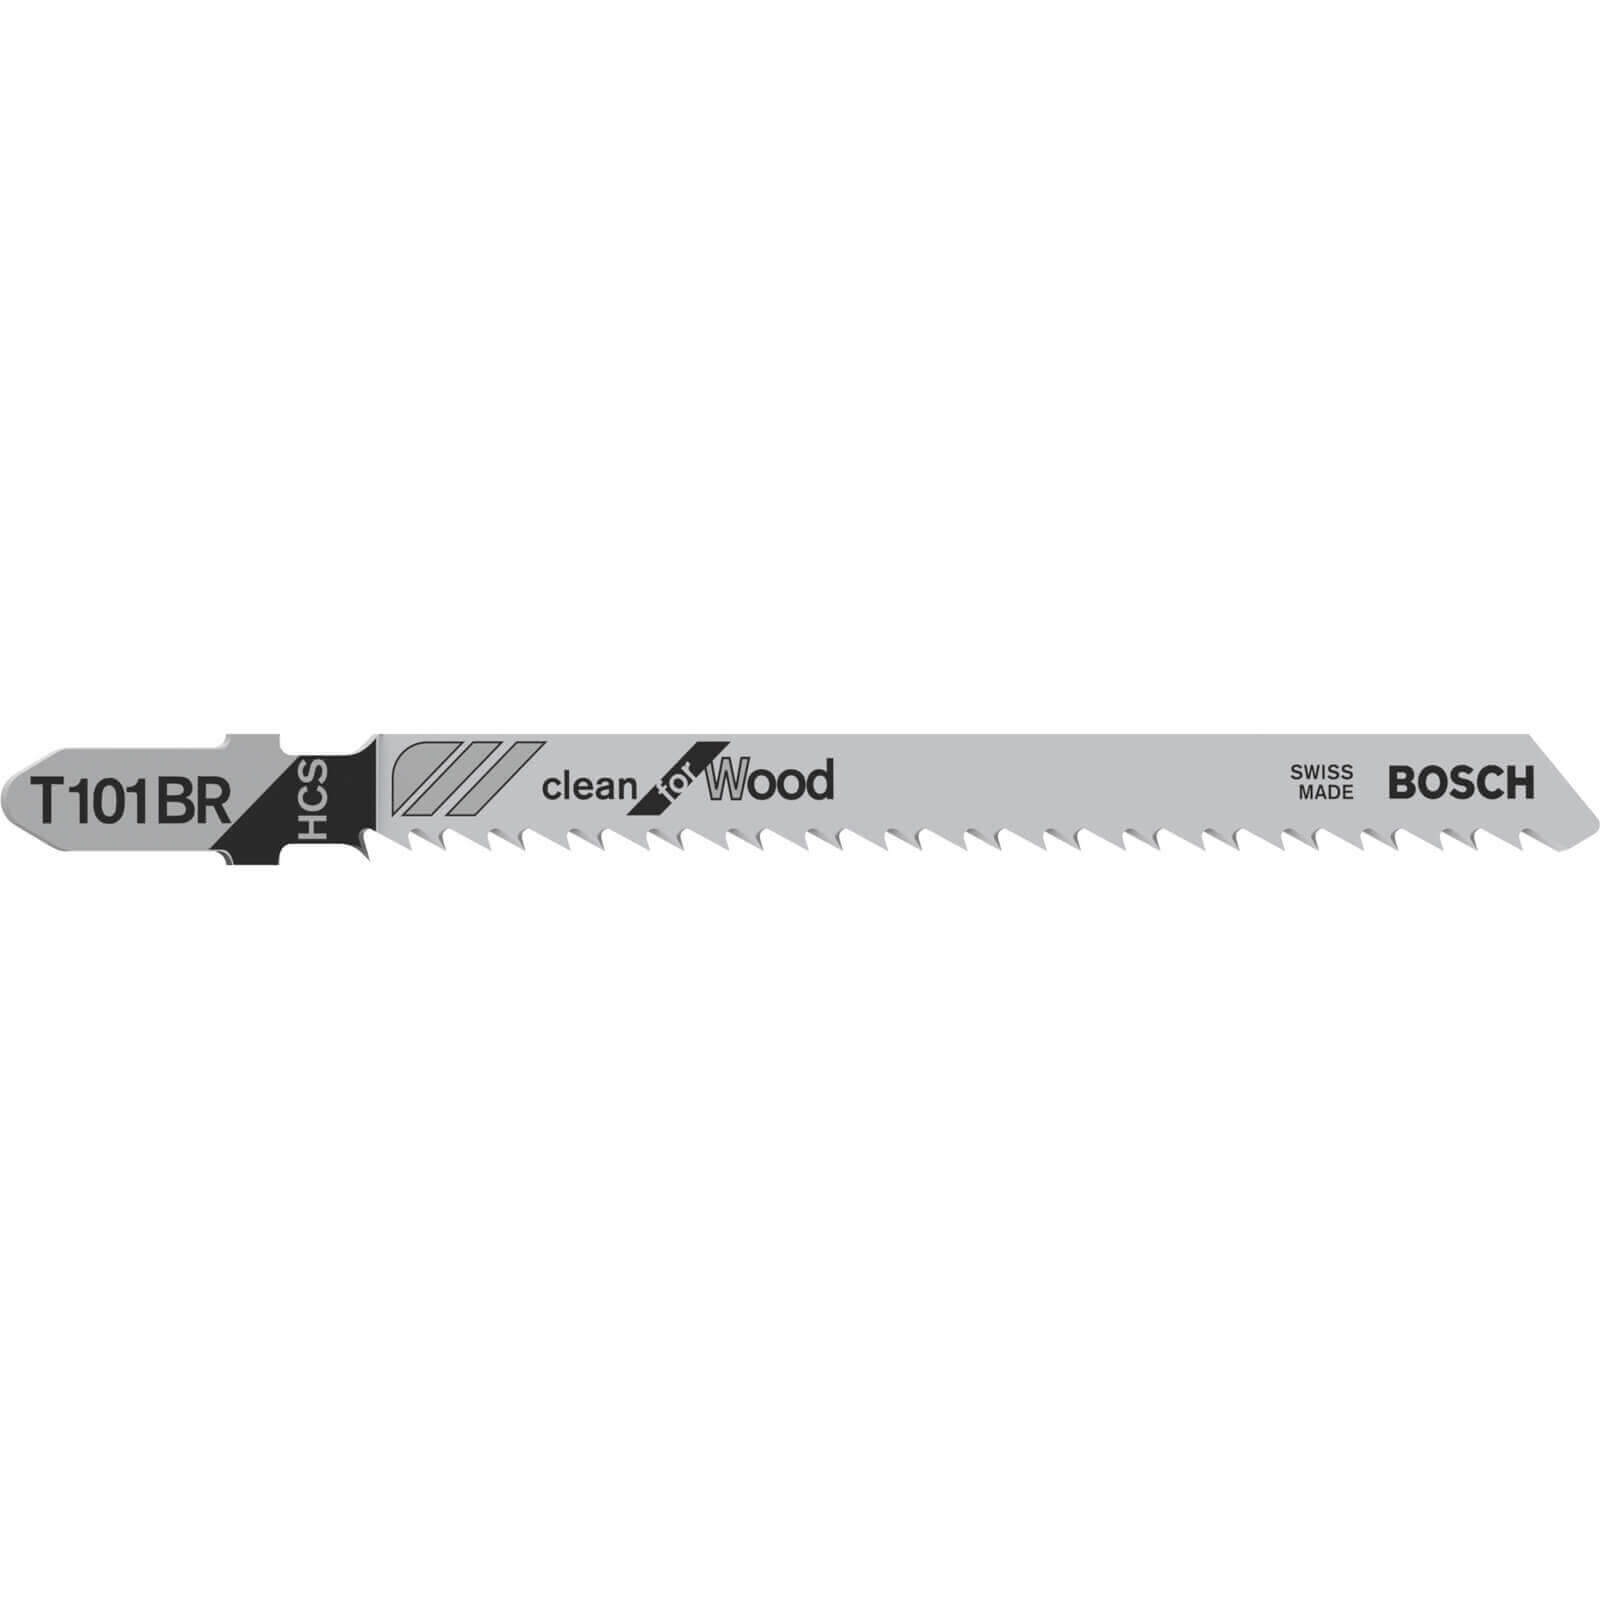 Image of Bosch T101BR Down Cutting Wood Jigsaw Blades Pack of 5